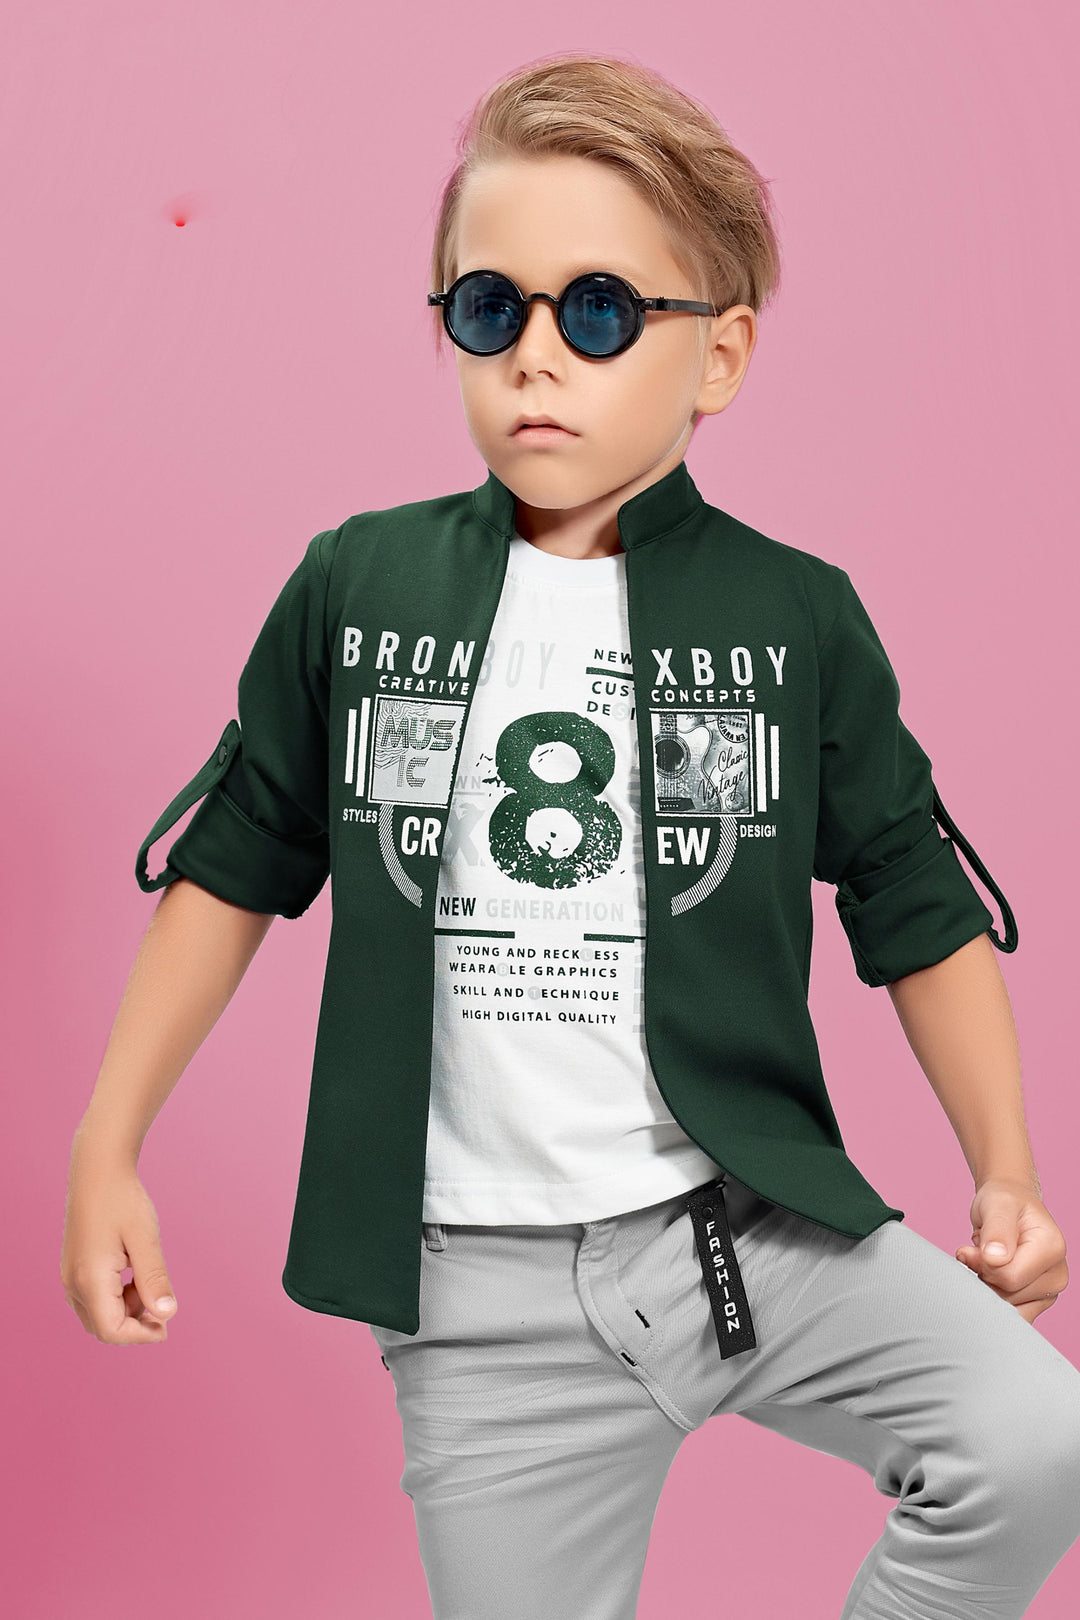 Bottle Green Blazer with White T-Shirt and Grey Pant Set for Boys with Belt - Seasons Chennai